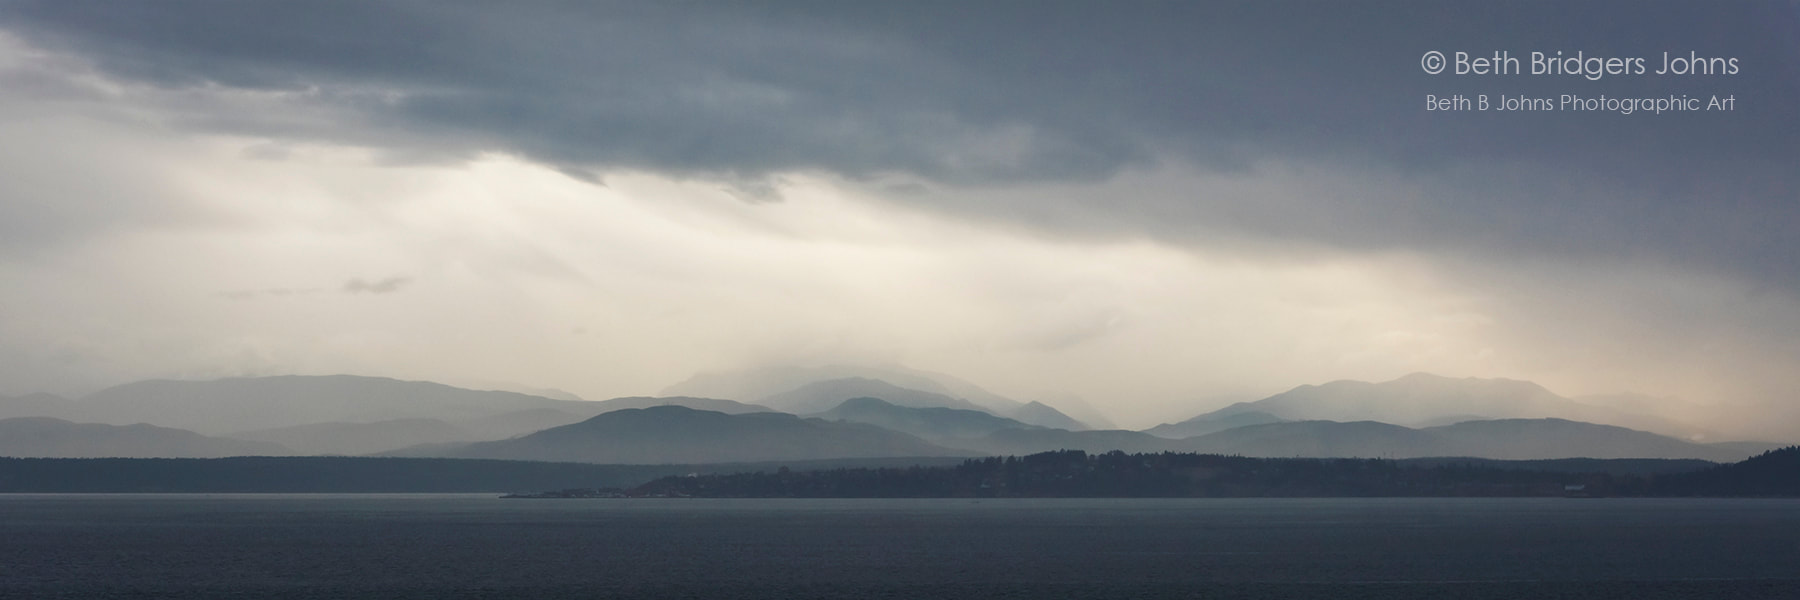 The Olympic Mountains from across Admiralty Bay, Beth B Johns Photographic Art